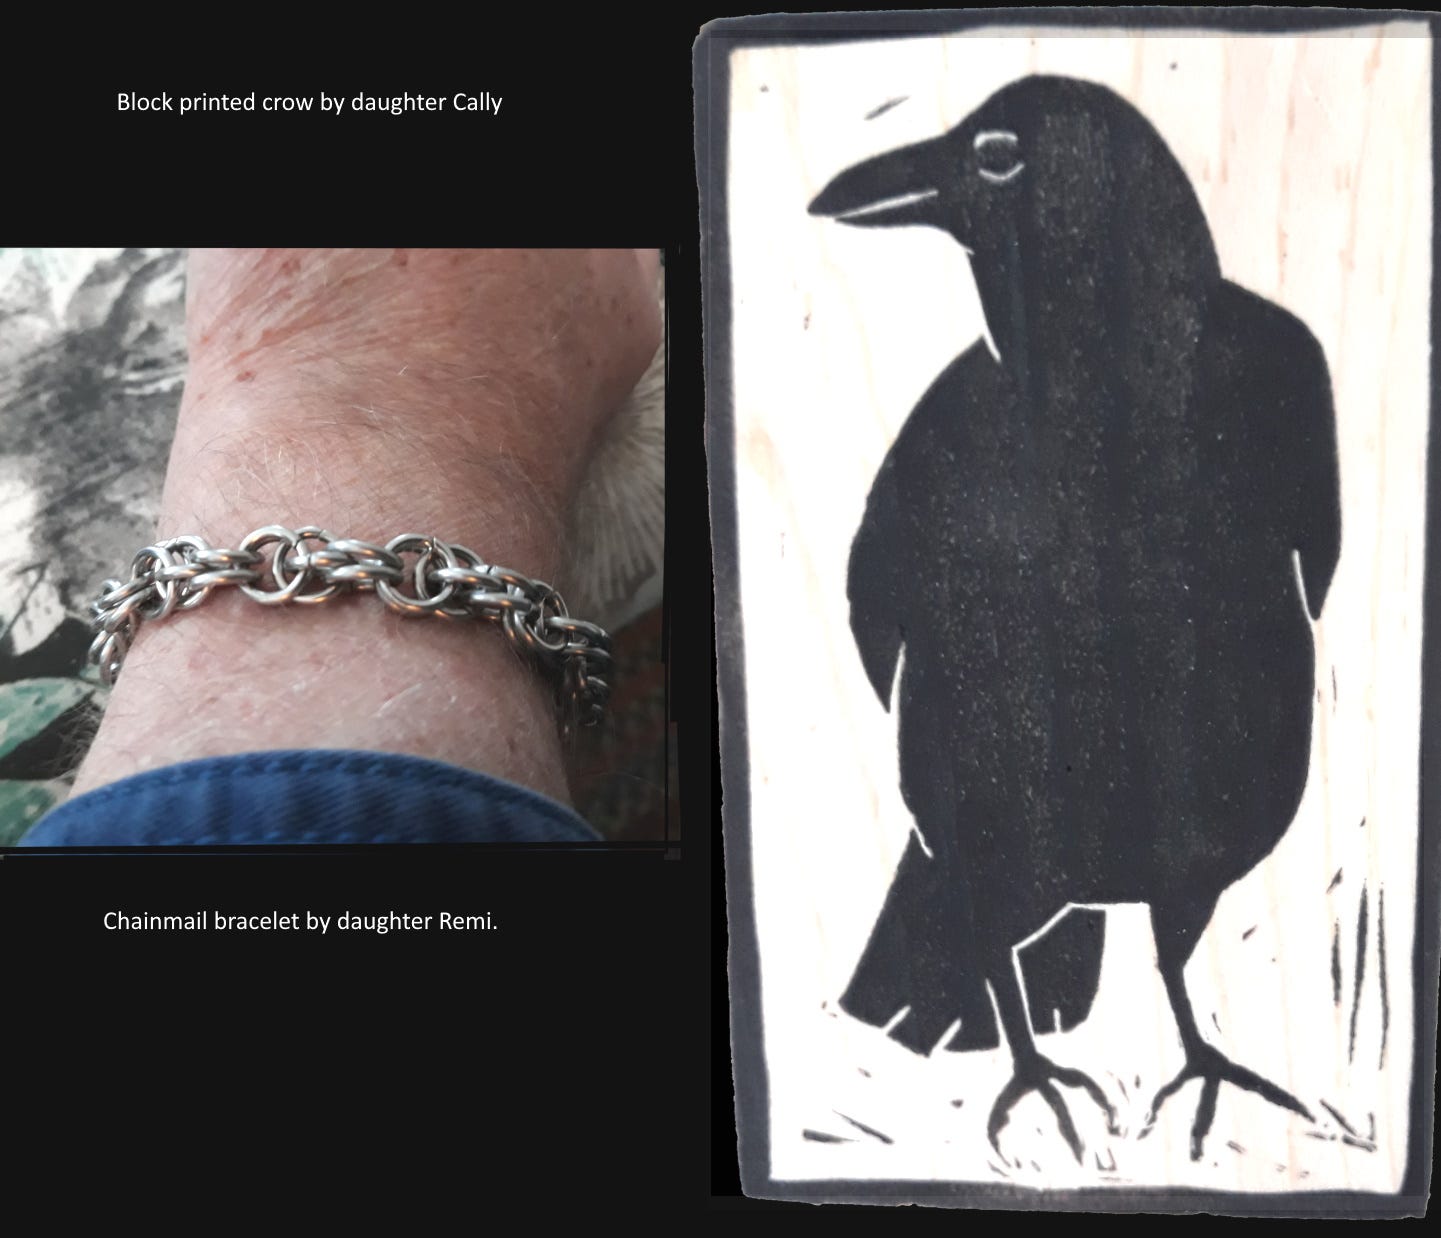 Chainmail bracelet and block print crow.